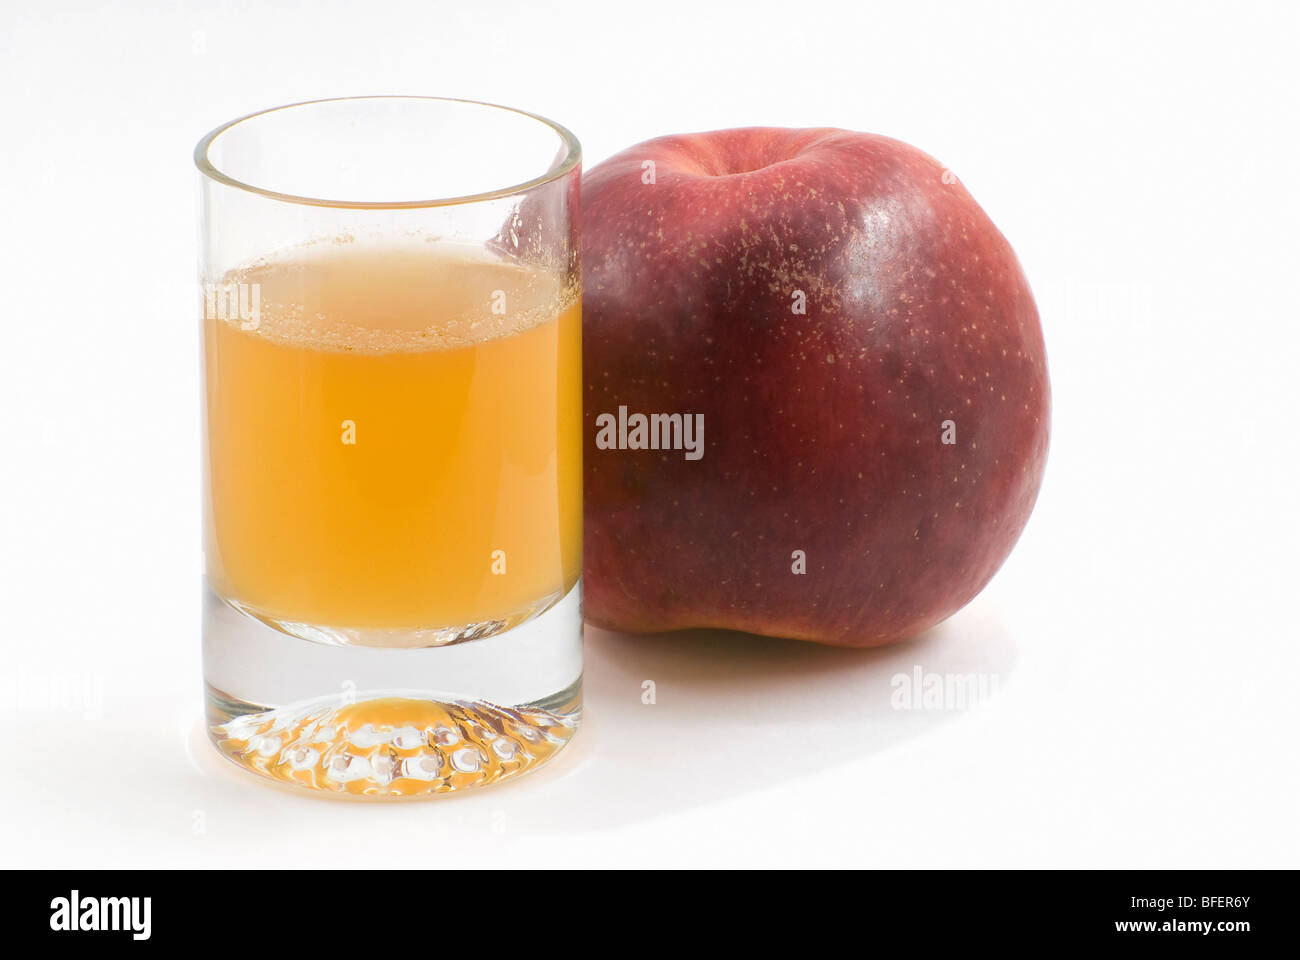 Glass of the juice and a red apple Stock Photo